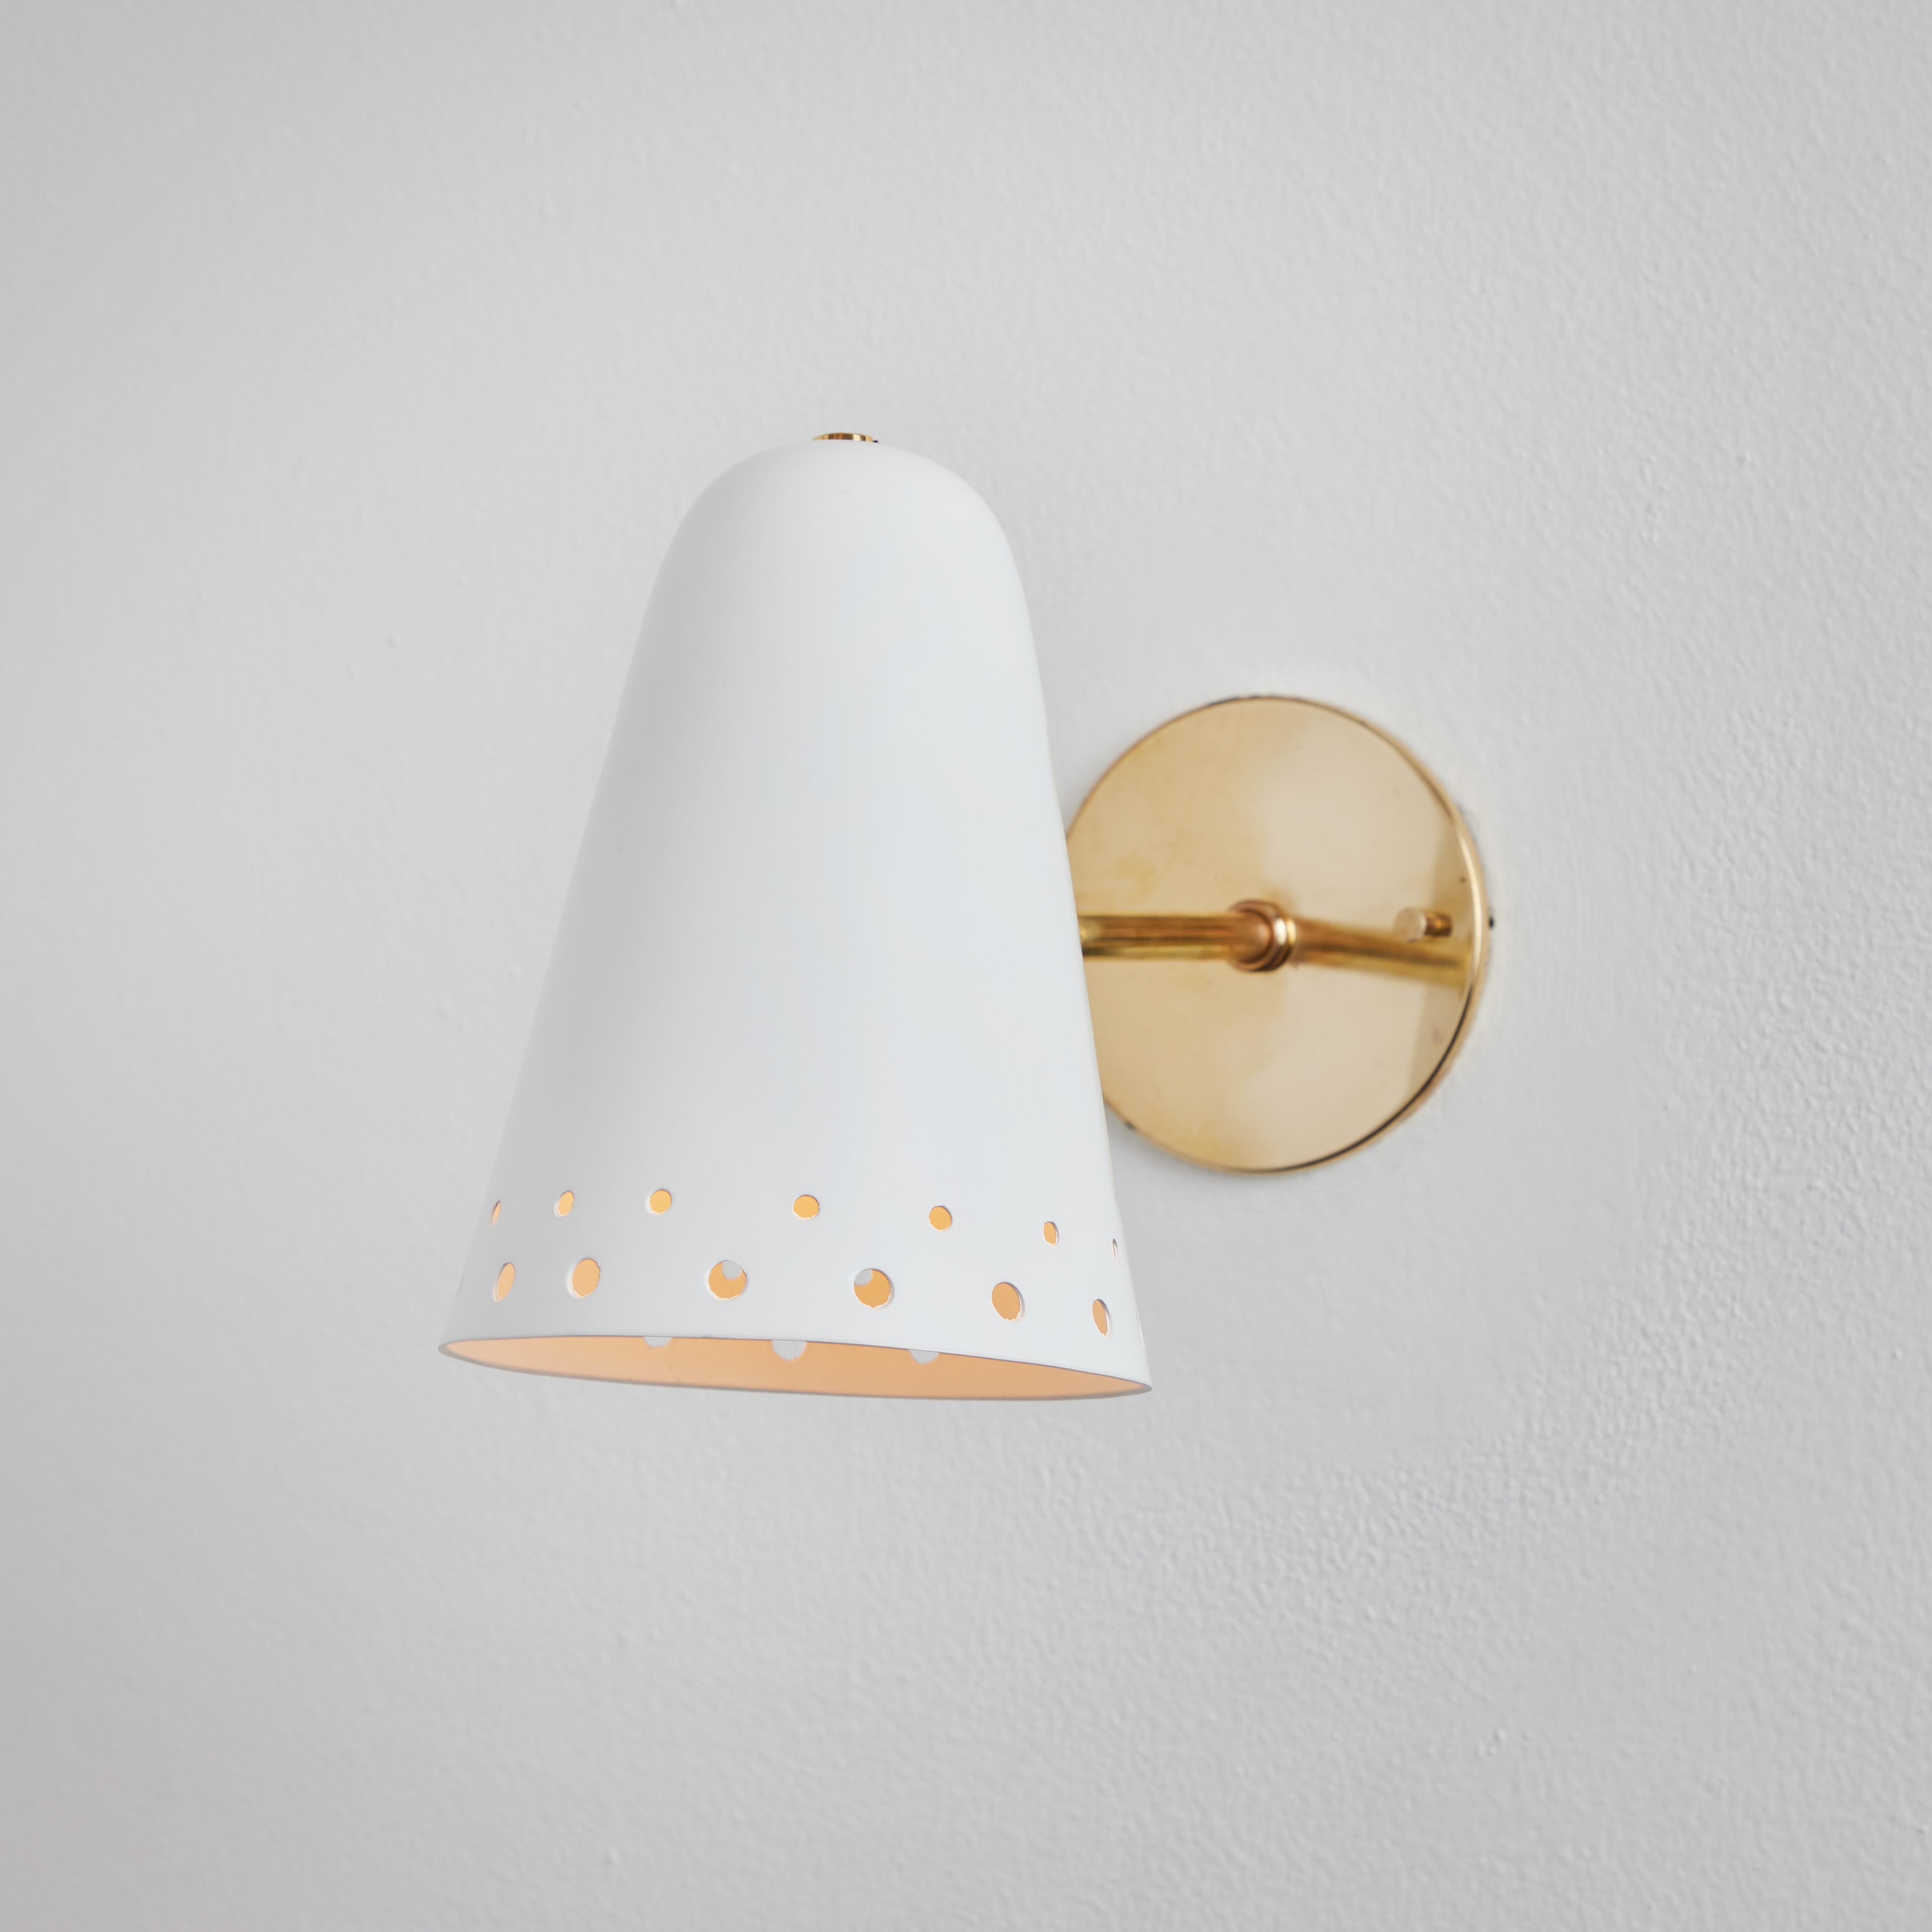 Rare 1950s Robert Mathieu Perforated White Metal and Brass Wall Sconce For Sale 9